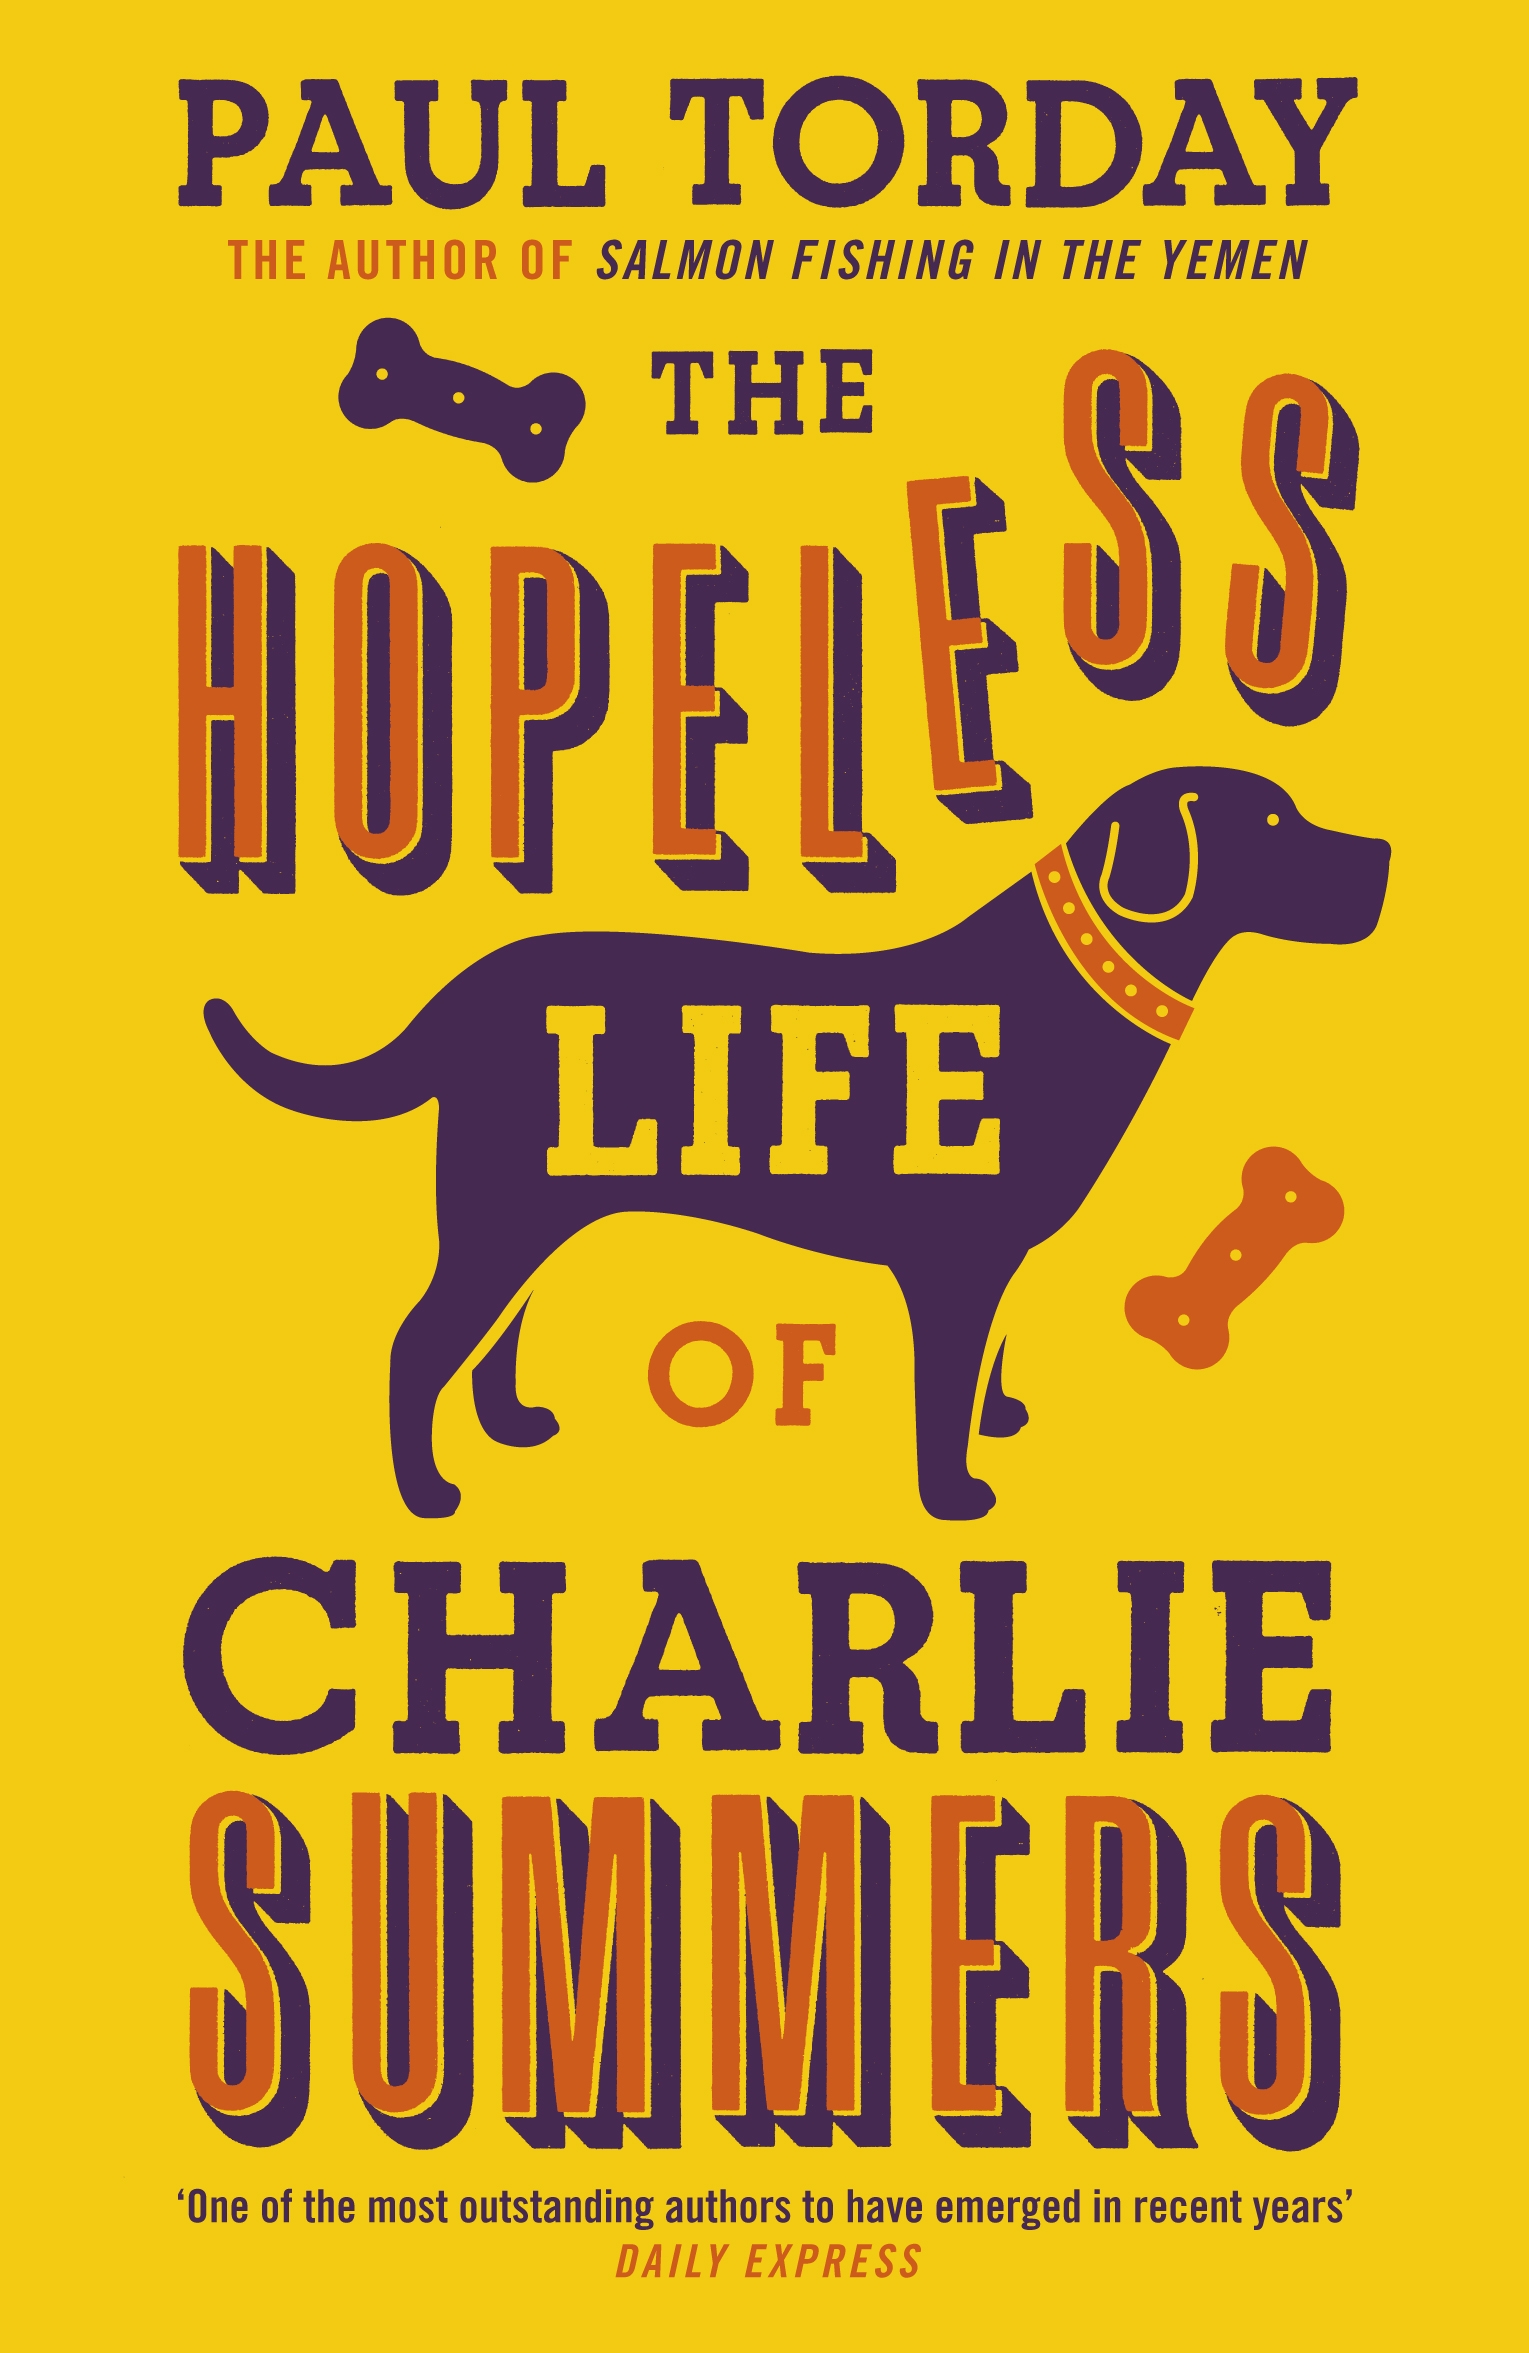 The Hopeless Life of Charlie Summers by Paul Torday book Cover